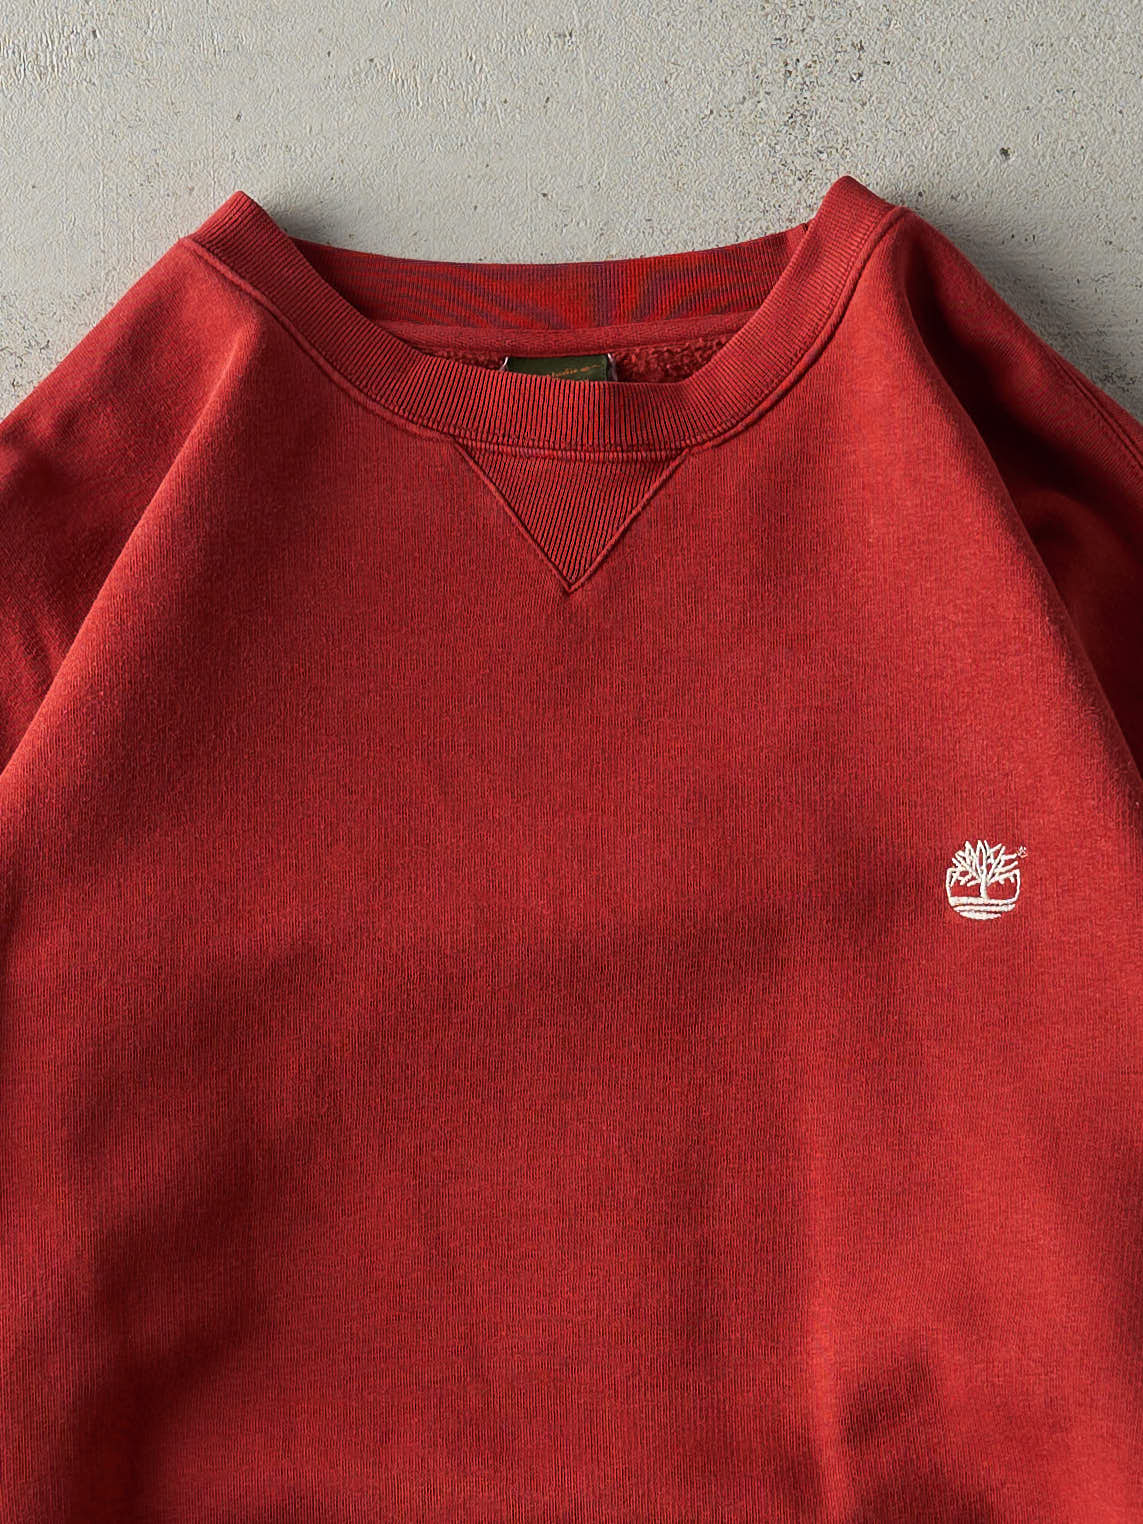 Vintage 90s Red Embroidered Timberland Boxy Crewneck (XL)